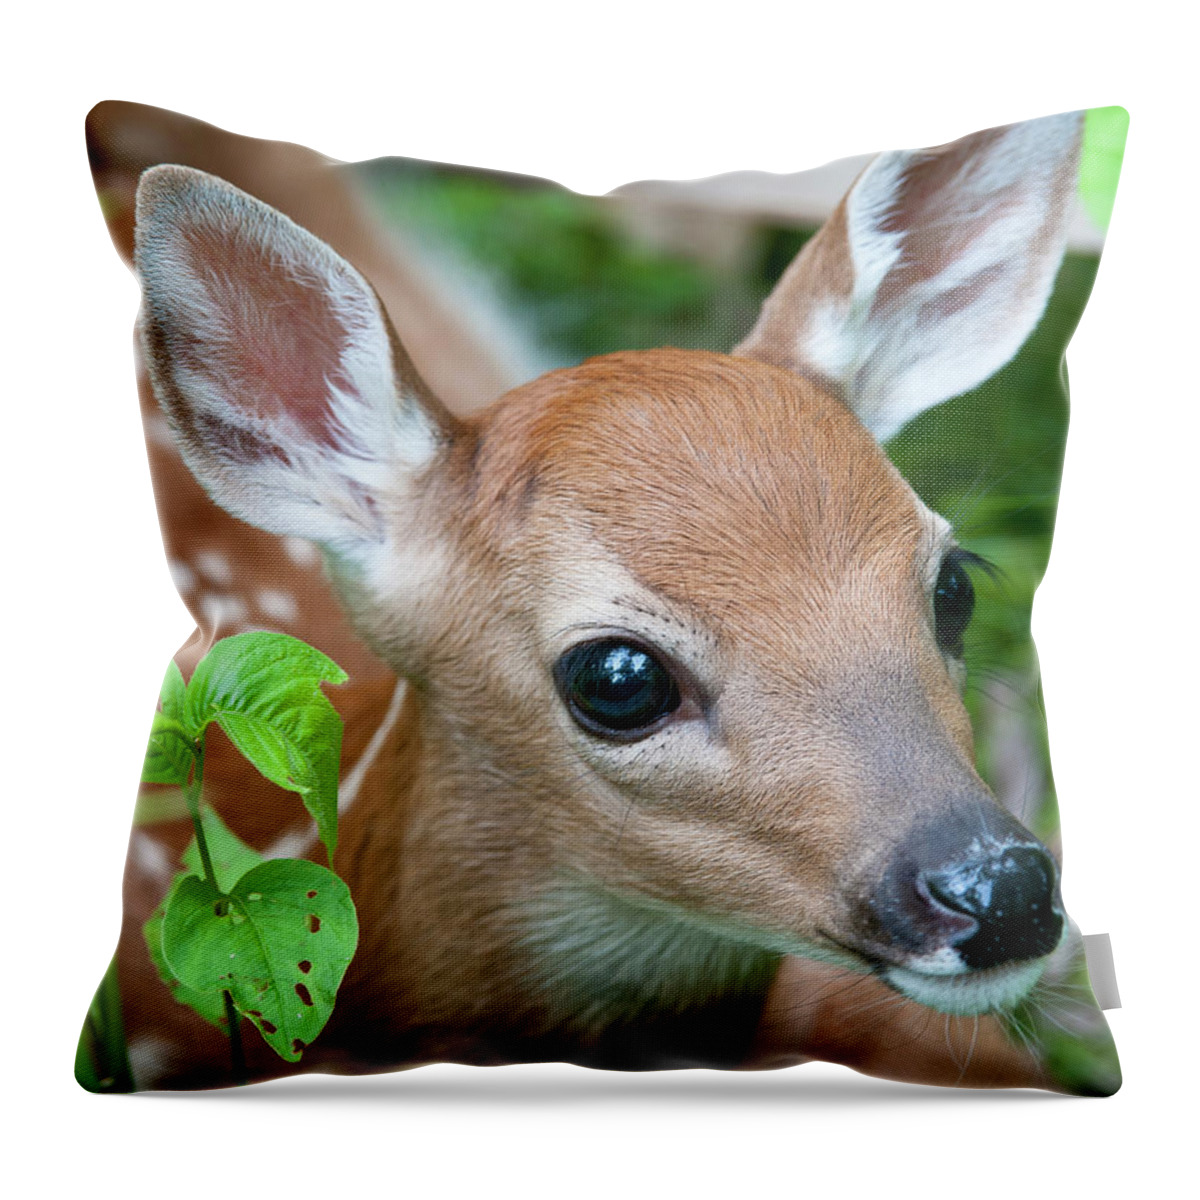 Alertness Throw Pillow featuring the photograph Cute by Frankhildebrand